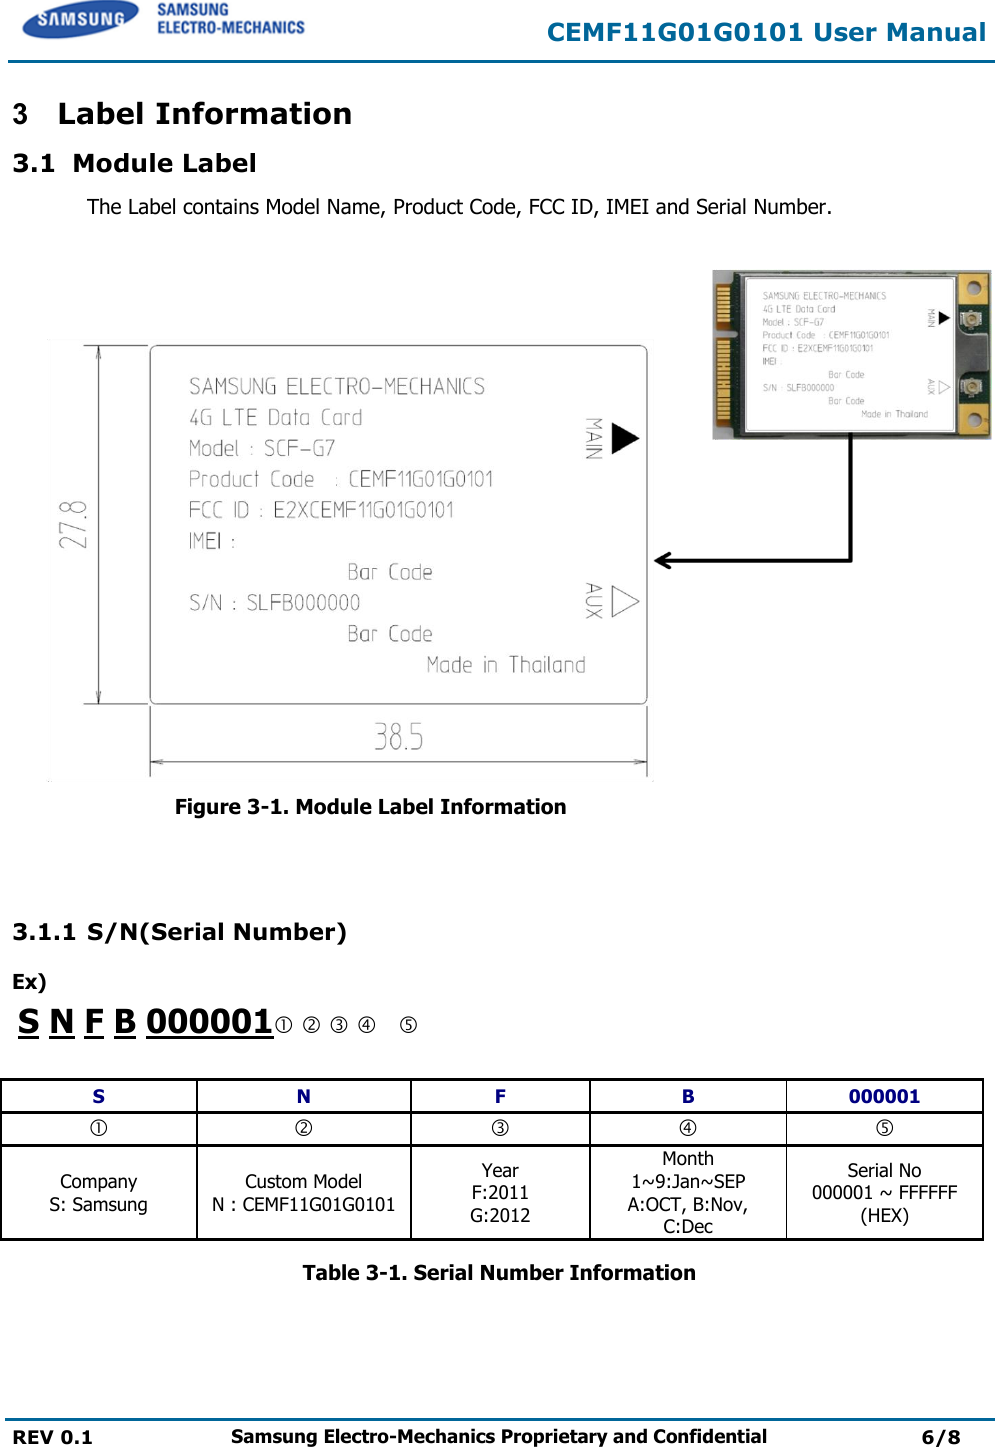  CEMF11G01G0101 User Manual  REV 0.1 Samsung Electro-Mechanics Proprietary and Confidential 6/8  3  Label Information 3.1 Module Label    The Label contains Model Name, Product Code, FCC ID, IMEI and Serial Number.                            Figure 3-1. Module Label Information   3.1.1 S/N(Serial Number) Ex)  S N F B 000001        S N F B 000001      Company S: Samsung Custom Model N : CEMF11G01G0101 Year F:2011 G:2012 Month 1~9:Jan~SEP A:OCT, B:Nov, C:Dec Serial No 000001 ~ FFFFFF (HEX) Table 3-1. Serial Number Information M &amp; SOFT AMERICA MAP CENTERTEL : 888-757-0010WEBSITE : www.mapnsoft.comMAP DATABASE HOTLINEThis equipment has been tested and found to comply with the limits for a Class A digital device, pursuant to part 15 of the FCC Rules. These limits are designed to provide reasonable protection against harmful interference in a residential installation. This equipment generates, uses and can radiate radio frequency energy and, if not installed and used in accordance with the instructions, may cause harmful interference to radio communications. However, there is no guarantee that interference will not occur in a particular installation. If this equipment does cause harmful interference to radio or television reception, which can be determined by turning the equipment off and on, the user is encouraged to try to correct the interference by one or more of the following measures: ˍ Reorient or relocate the receiving antenna. ˍ Increase the separation between the equipment and receiver. ˍ Connect the equipment into an outlet on a circuit different from that to which the receiver is connected. ˍ Consult the dealer or an experienced radio/TV technician for help. Caution: Any changes or modiﬁcations to this device not explicitly approved by manufacturer could void your authority to operate this equipment. This device complies with part 15 of the FCC Rules. Operation is subject to the following two conditions: (1) This device may notcause harmful interference, and (2) this device must accept any interference received, including interference that may cause undesired operation. ,&amp;:DUQLQJ7KLVGHYLFHFRPSOLHVZLWK,QGXVWU\&amp;DQDGDOLFHQFHH[HPSW566VWDQGDUGV2SHUDWLRQLVVXEMHFWWRWKHIROORZLQJWZRFRQGLWLRQVWKLVGHYLFHPD\QRWFDXVHLQWHUIHUHQFHDQGWKLVGHYLFHPXVWDFFHSWDQ\LQWHUIHUHQFHLQFOXGLQJLQWHUIHUHQFHWKDWPD\FDXVHXQGHVLUHGRSHUDWLRQRIWKHGHYLFH/HSUpVHQWDSSDUHLOHVWFRQIRUPHDX[&amp;15G,QGXVWULH&amp;DQDGDDSSOLFDEOHVDX[DSSDUHLOVUDGLRH[HPSWVGHOLFHQFH/H[SORLWDWLRQHVWDXWRULVpHDX[GHX[FRQGLWLRQVVXLYDQWHVODSSDUHLOQHGRLWSDVSURGXLUHGHEURXLOODJHHWOXWLOLVDWHXUGHODSSDUHLOGRLWDFFHSWHUWRXWEURXLOODJHUDGLRpOHFWULTXHVXELPrPHVLOHEURXLOODJHHVWVXVFHSWLEOHGHQFRPSURPHWWUHOHIRQFWLRQQHPHQW This equipment complies with FCC radiation exposure limits set forth for an uncontrolled environment. This equipment should be installed and operated with minimum 20 cm between the radiator and your body. This transmitter must not be collocated or operating in conjunction with any other antenna or transmitter unless authorized to do so by the FCC. 